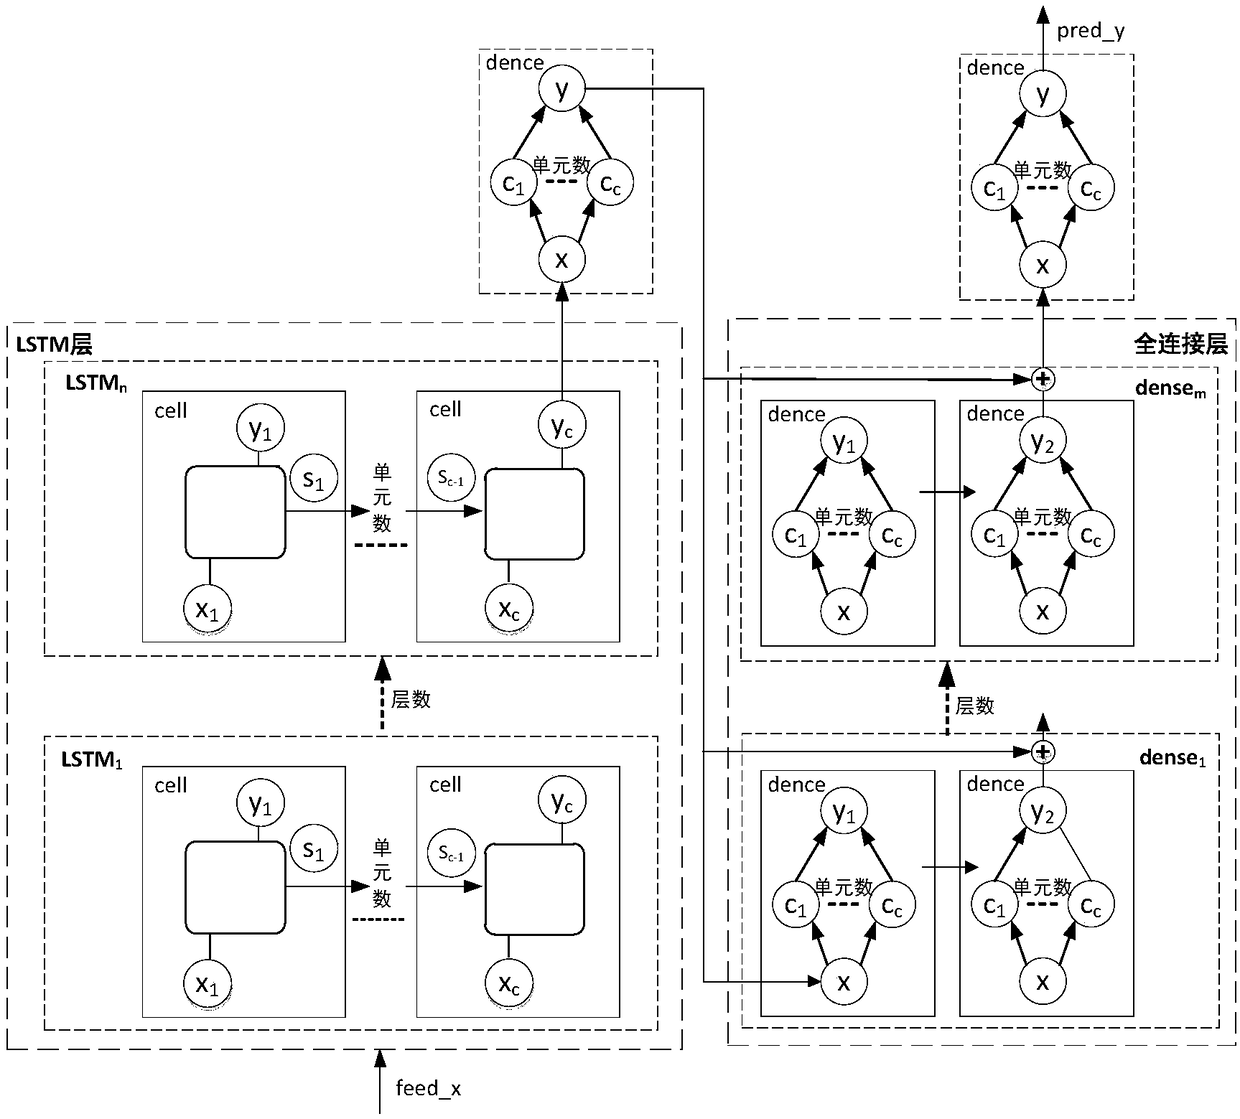 PMU primary frequency modulation load forecasting method based on LSTM and associative full-connected neural network